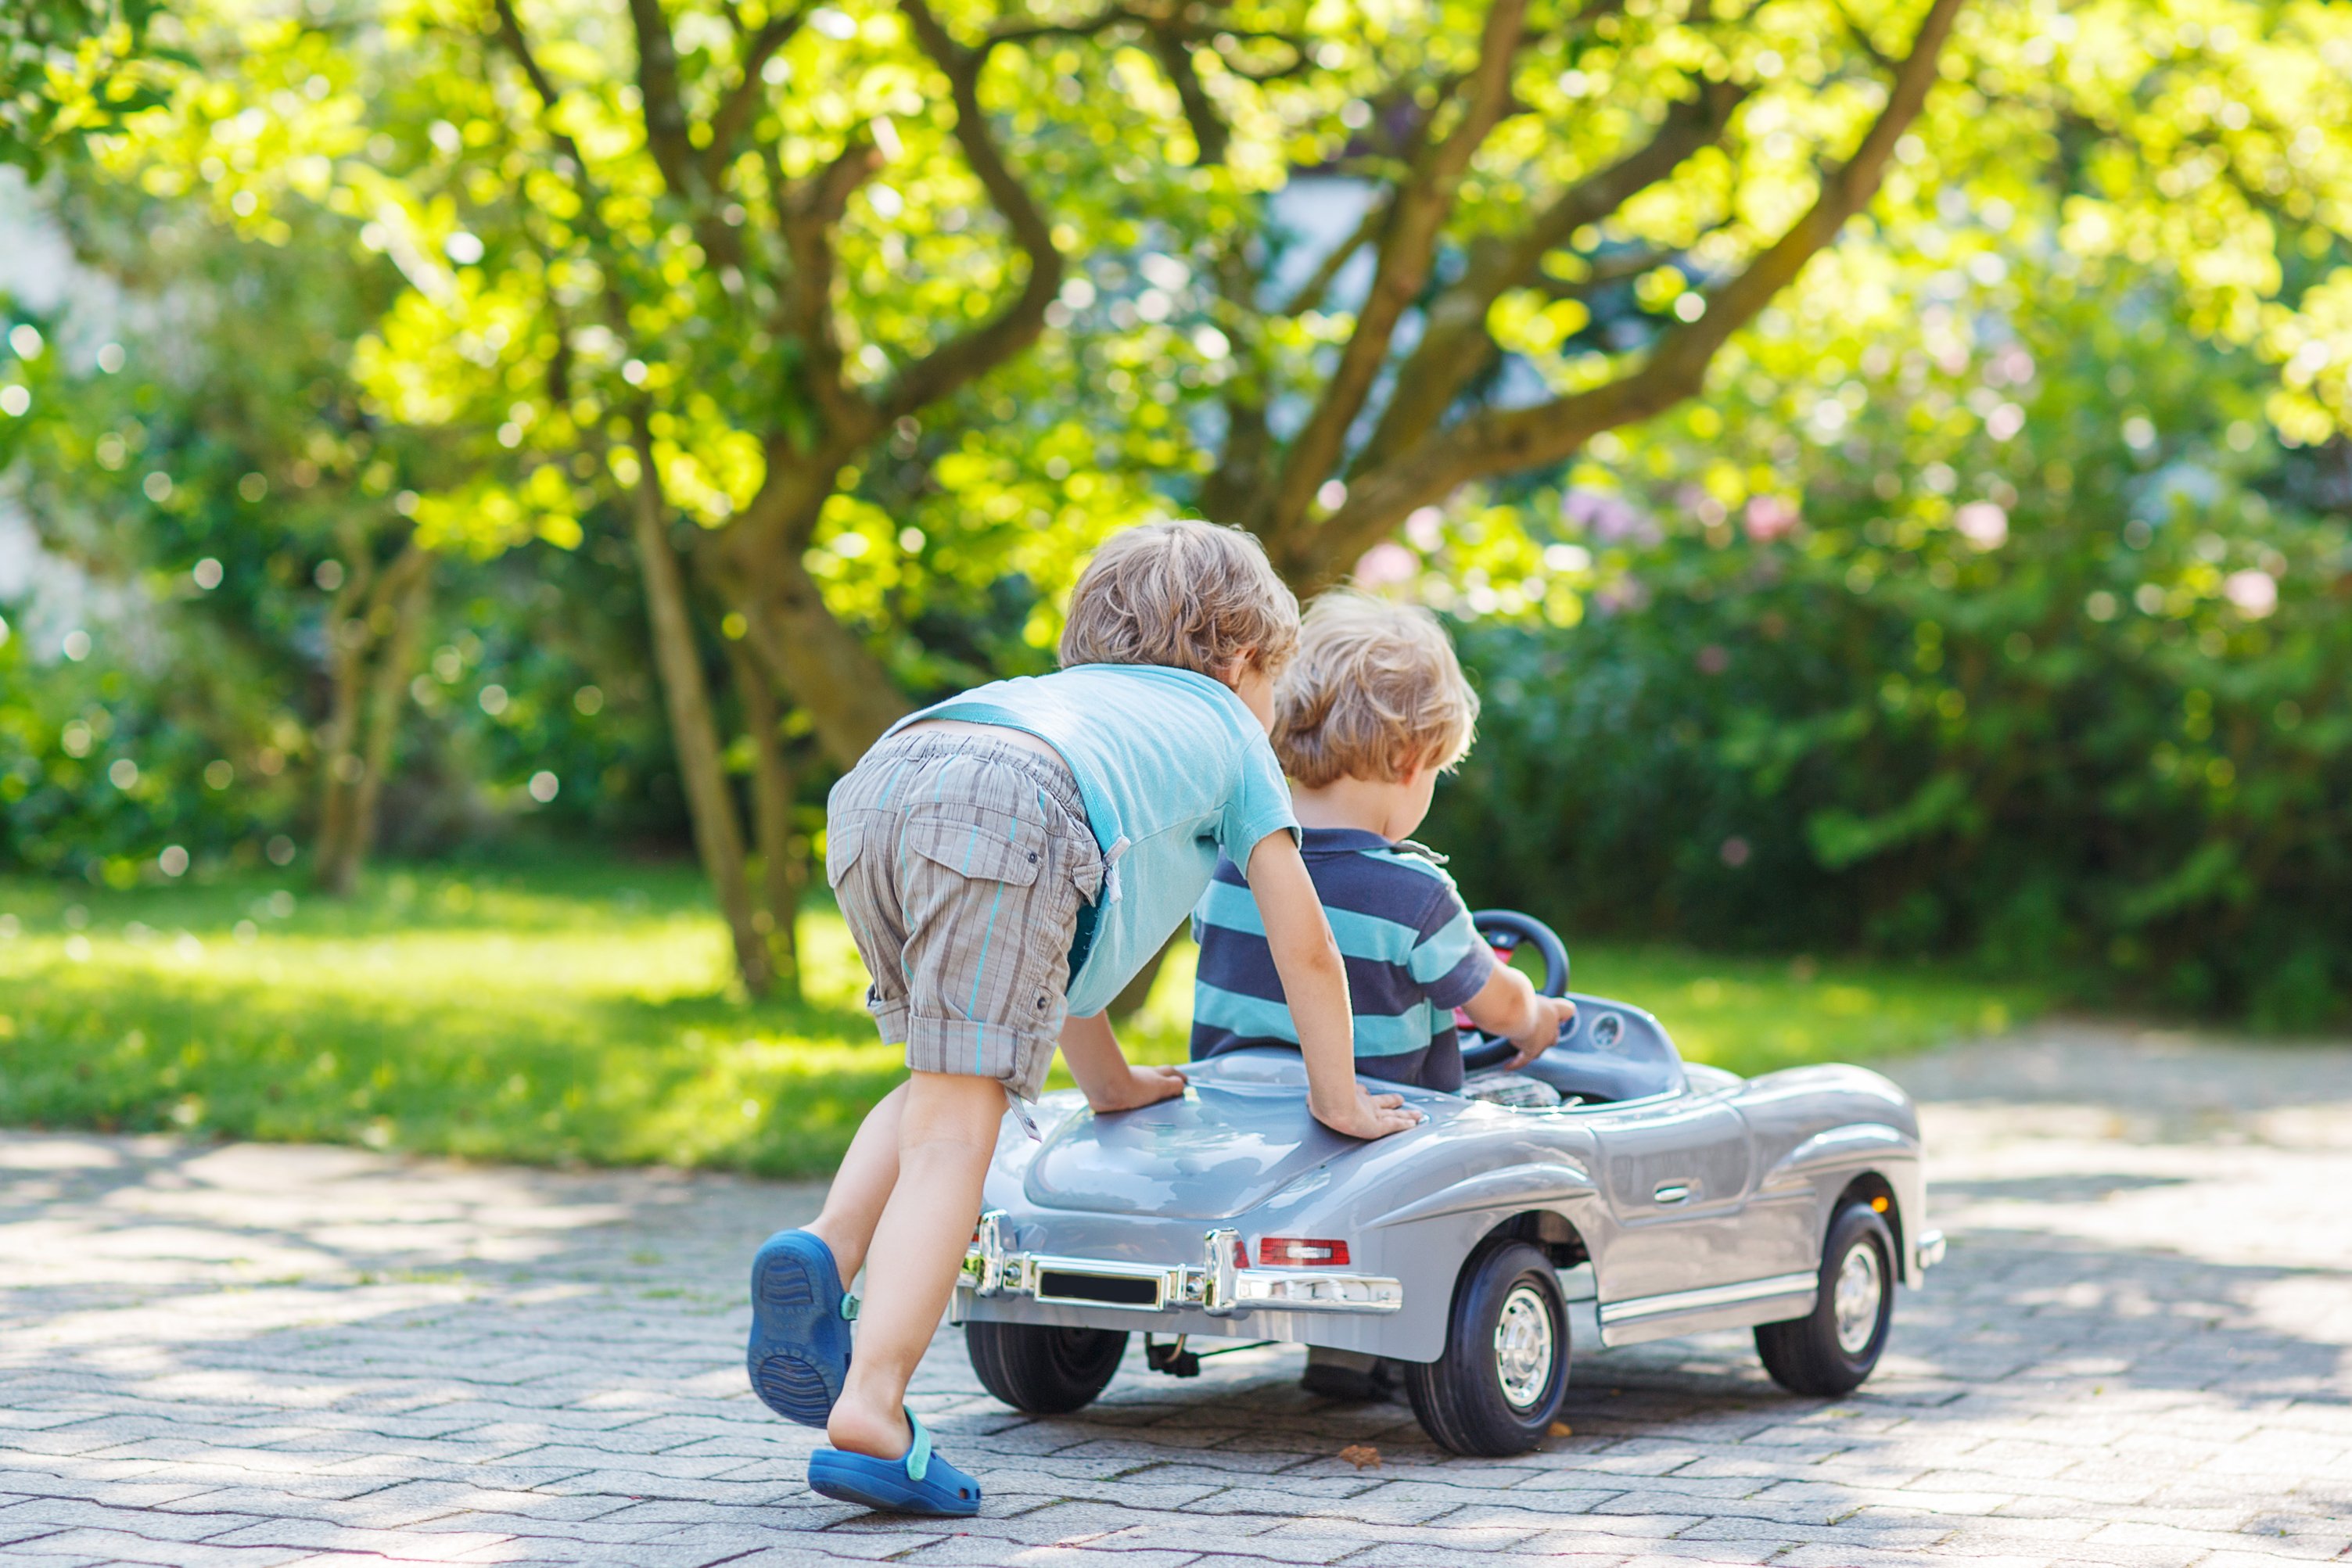 Two children playing with a toy car in a garden | Source: Shutterstock